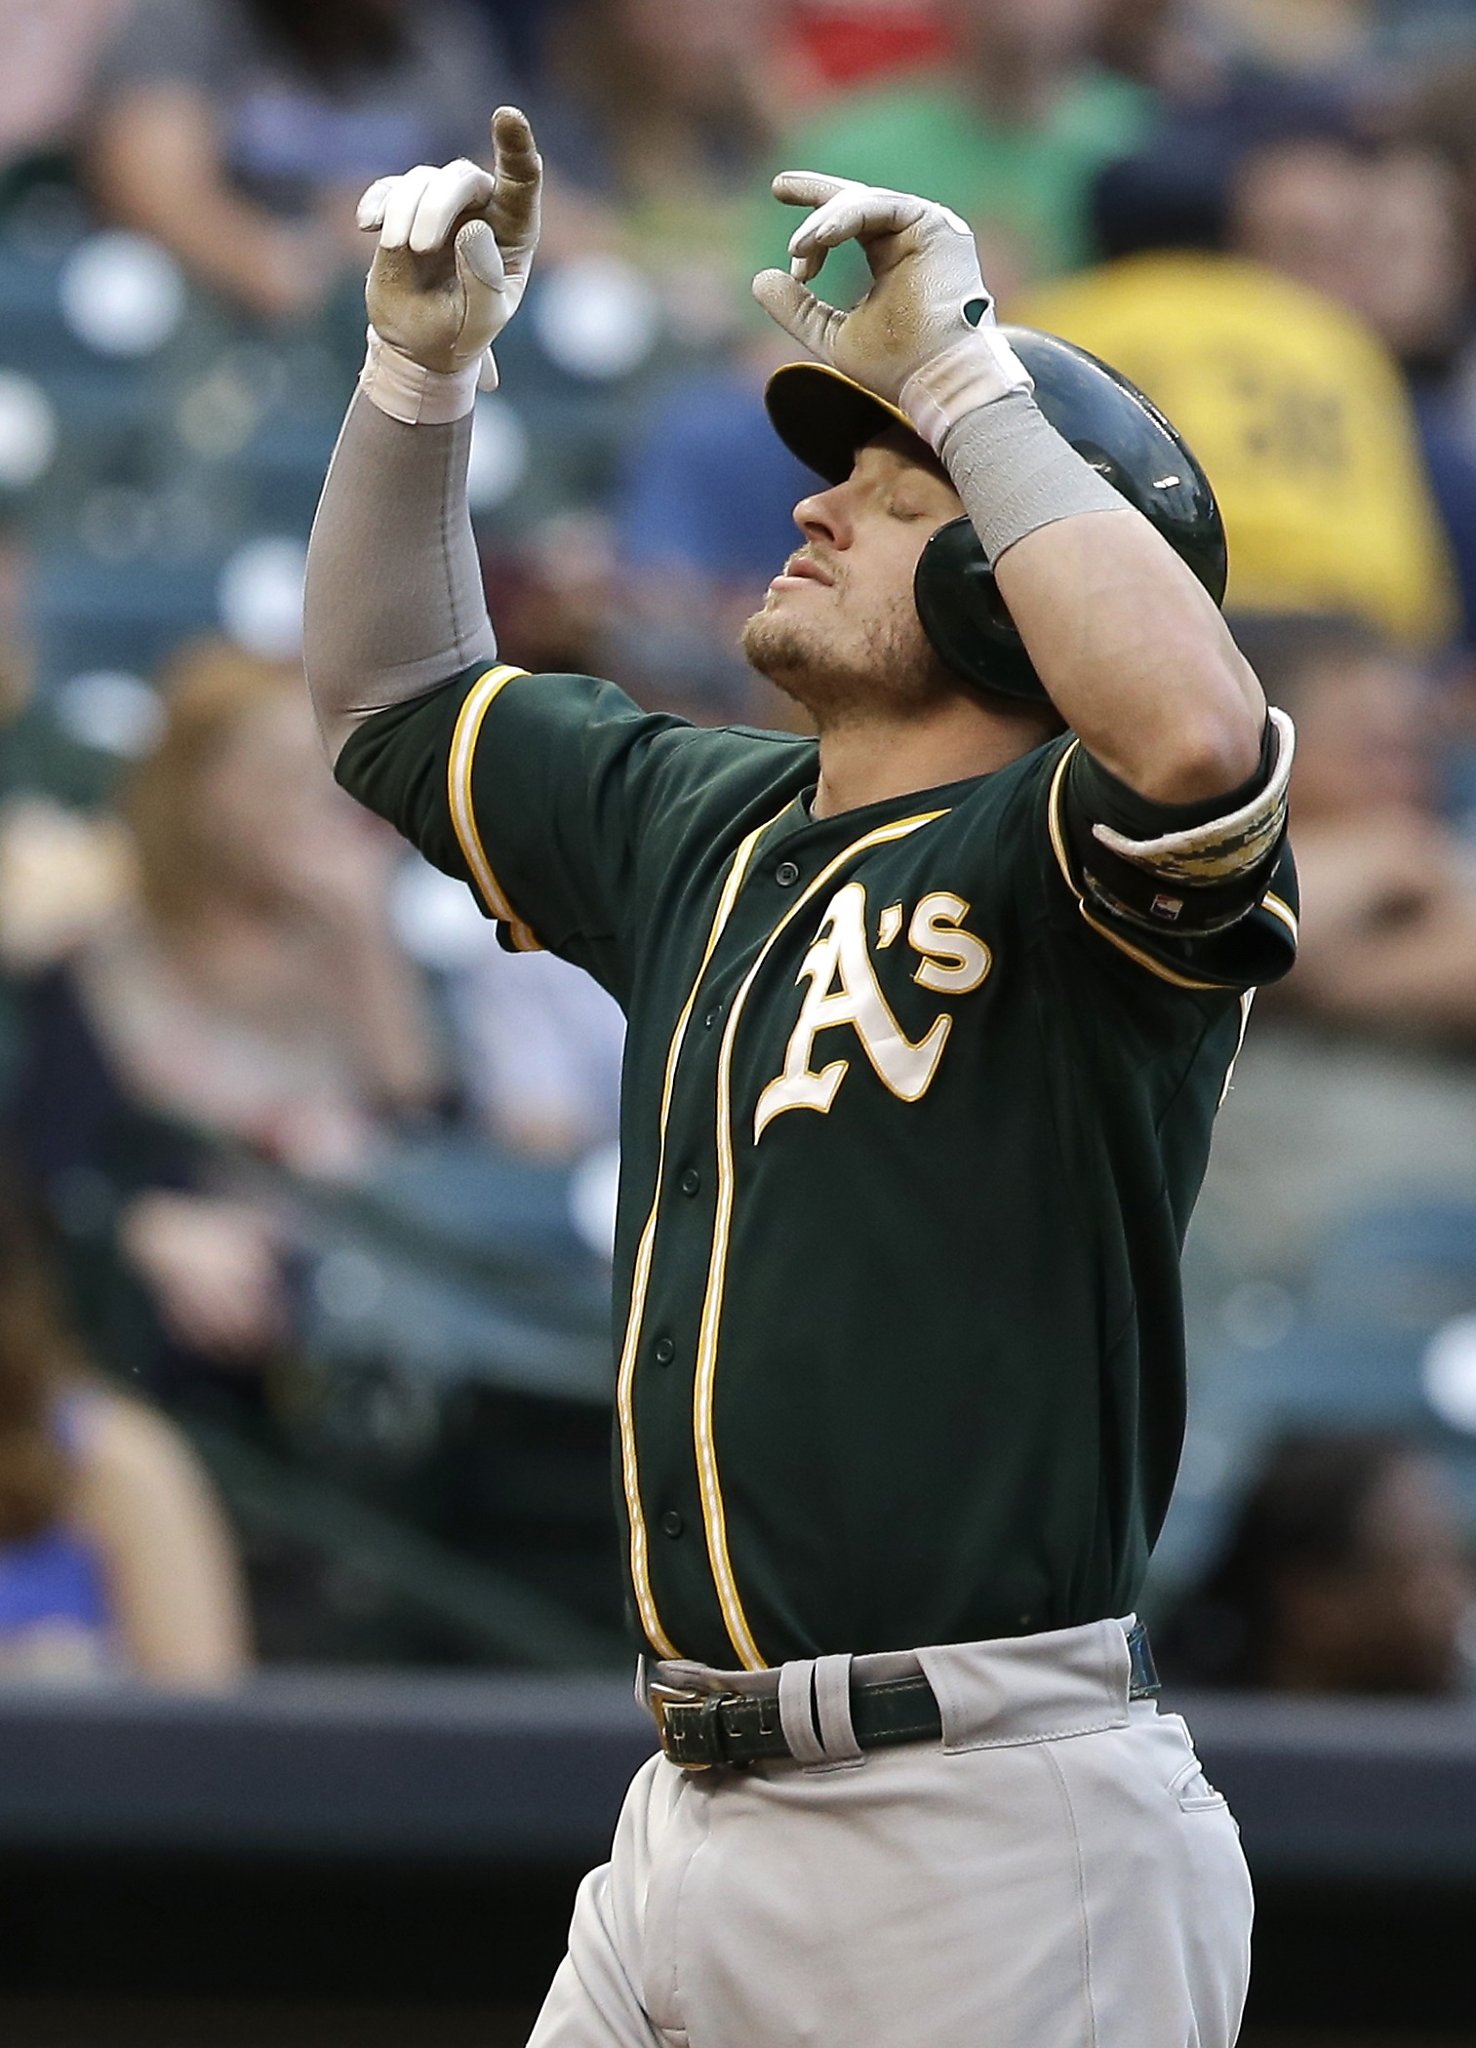 Home run barrage sinks A's in 10-1 loss to Astros - Athletics Nation